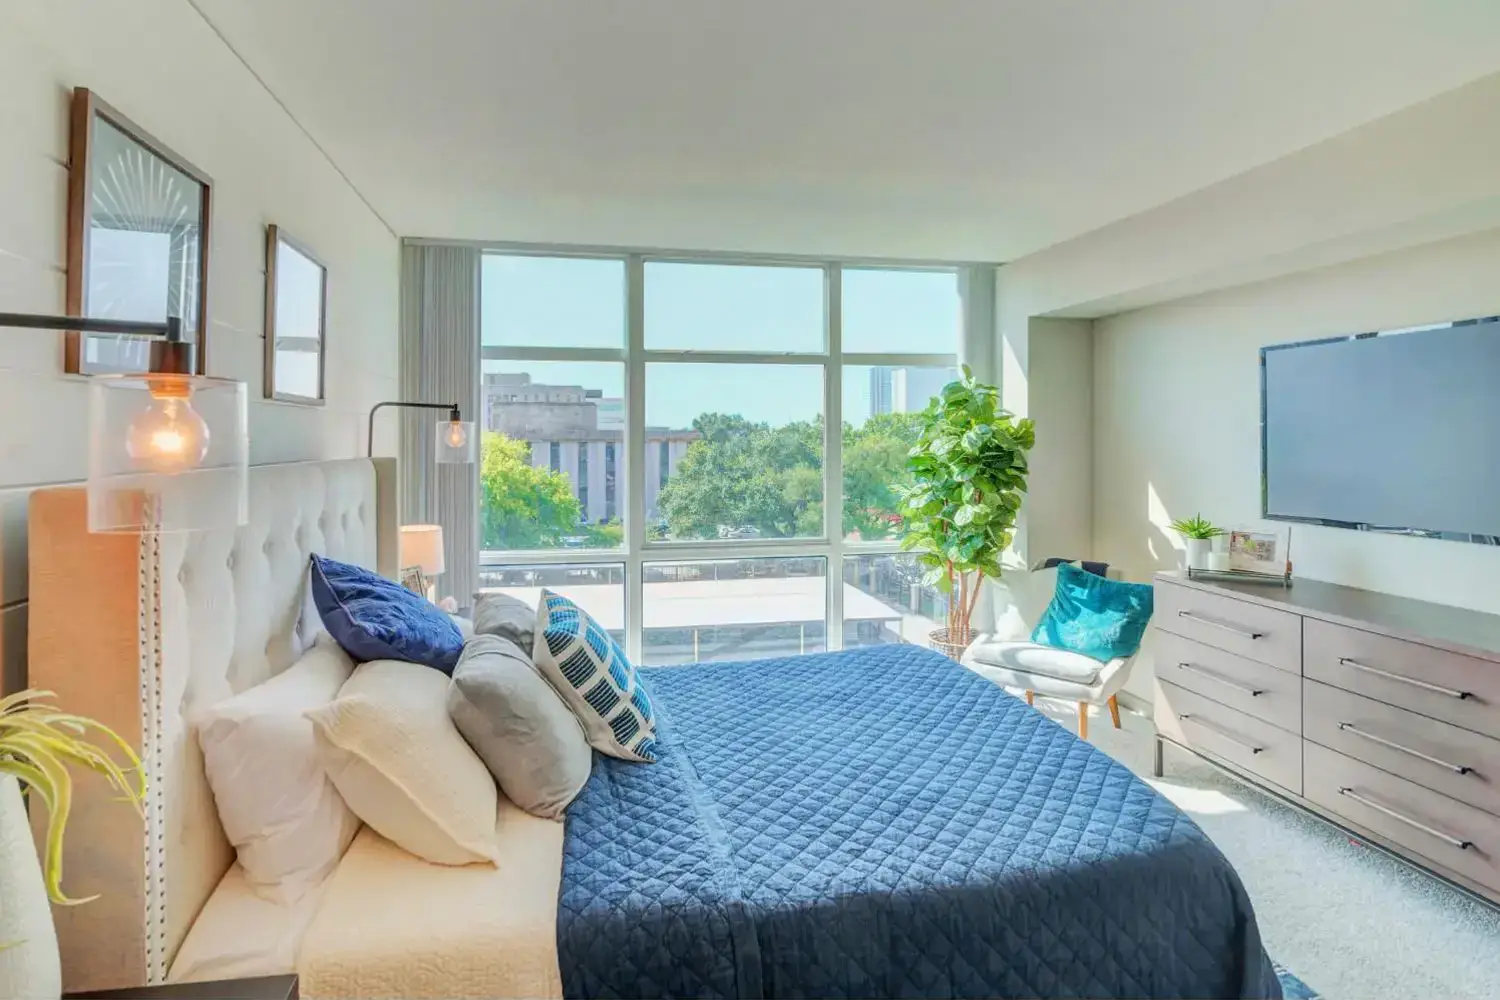 Modern bedroom with blue bedding and city skyline view.